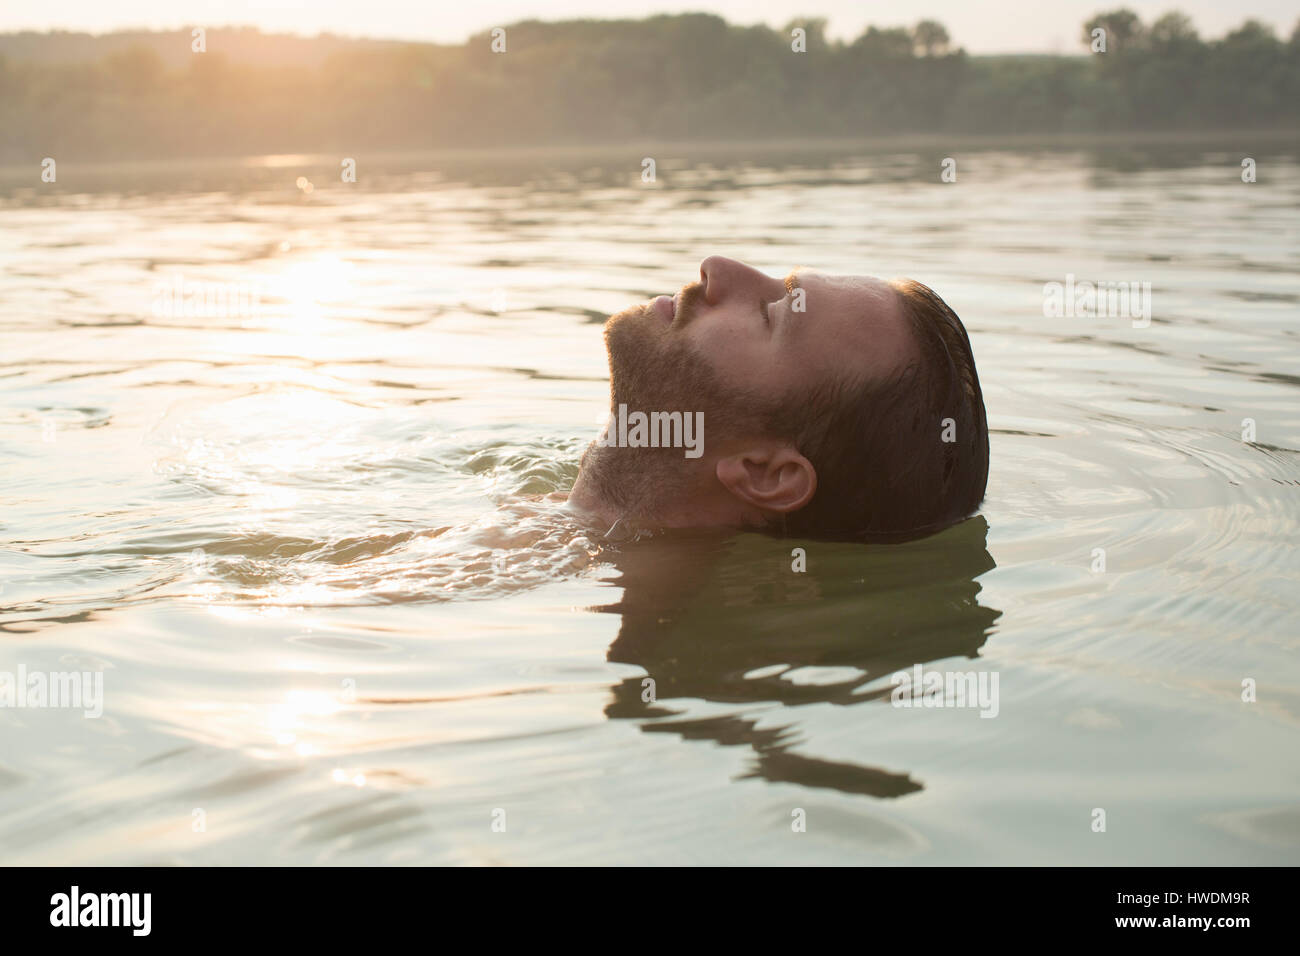 Man relaxing, floating in river Stock Photo